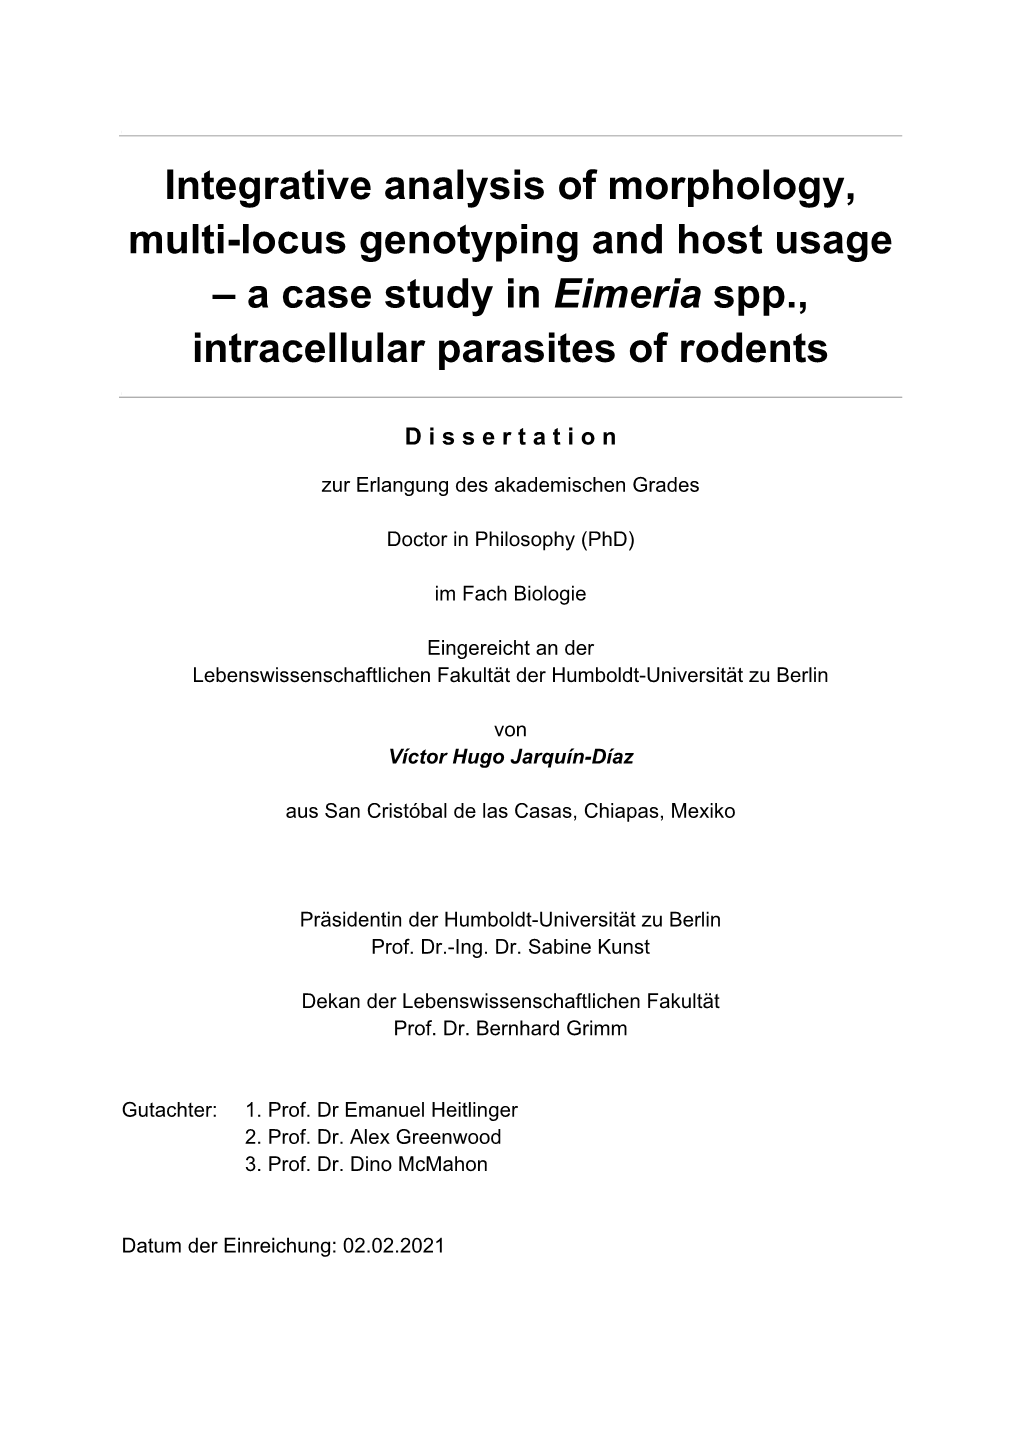 Integrative Analysis of Morphology, Multi-Locus Genotyping and Host Usage –A Case Study in Eimeria Spp.,Intracellular Parasite